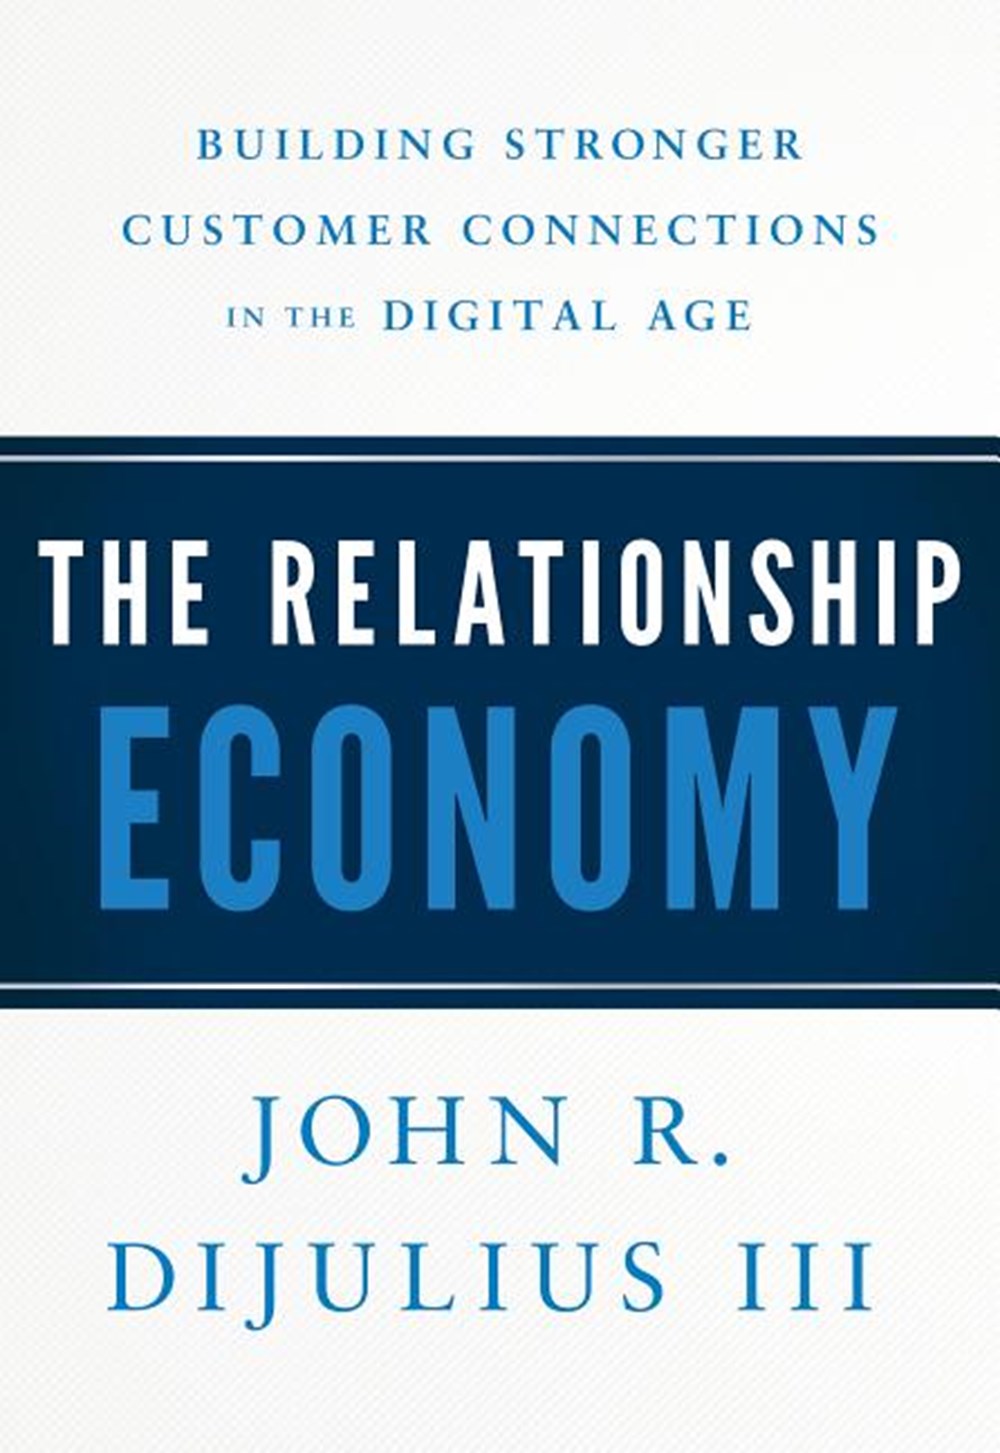 Relationship Economy: Building Stronger Customer Connections in the Digital Age